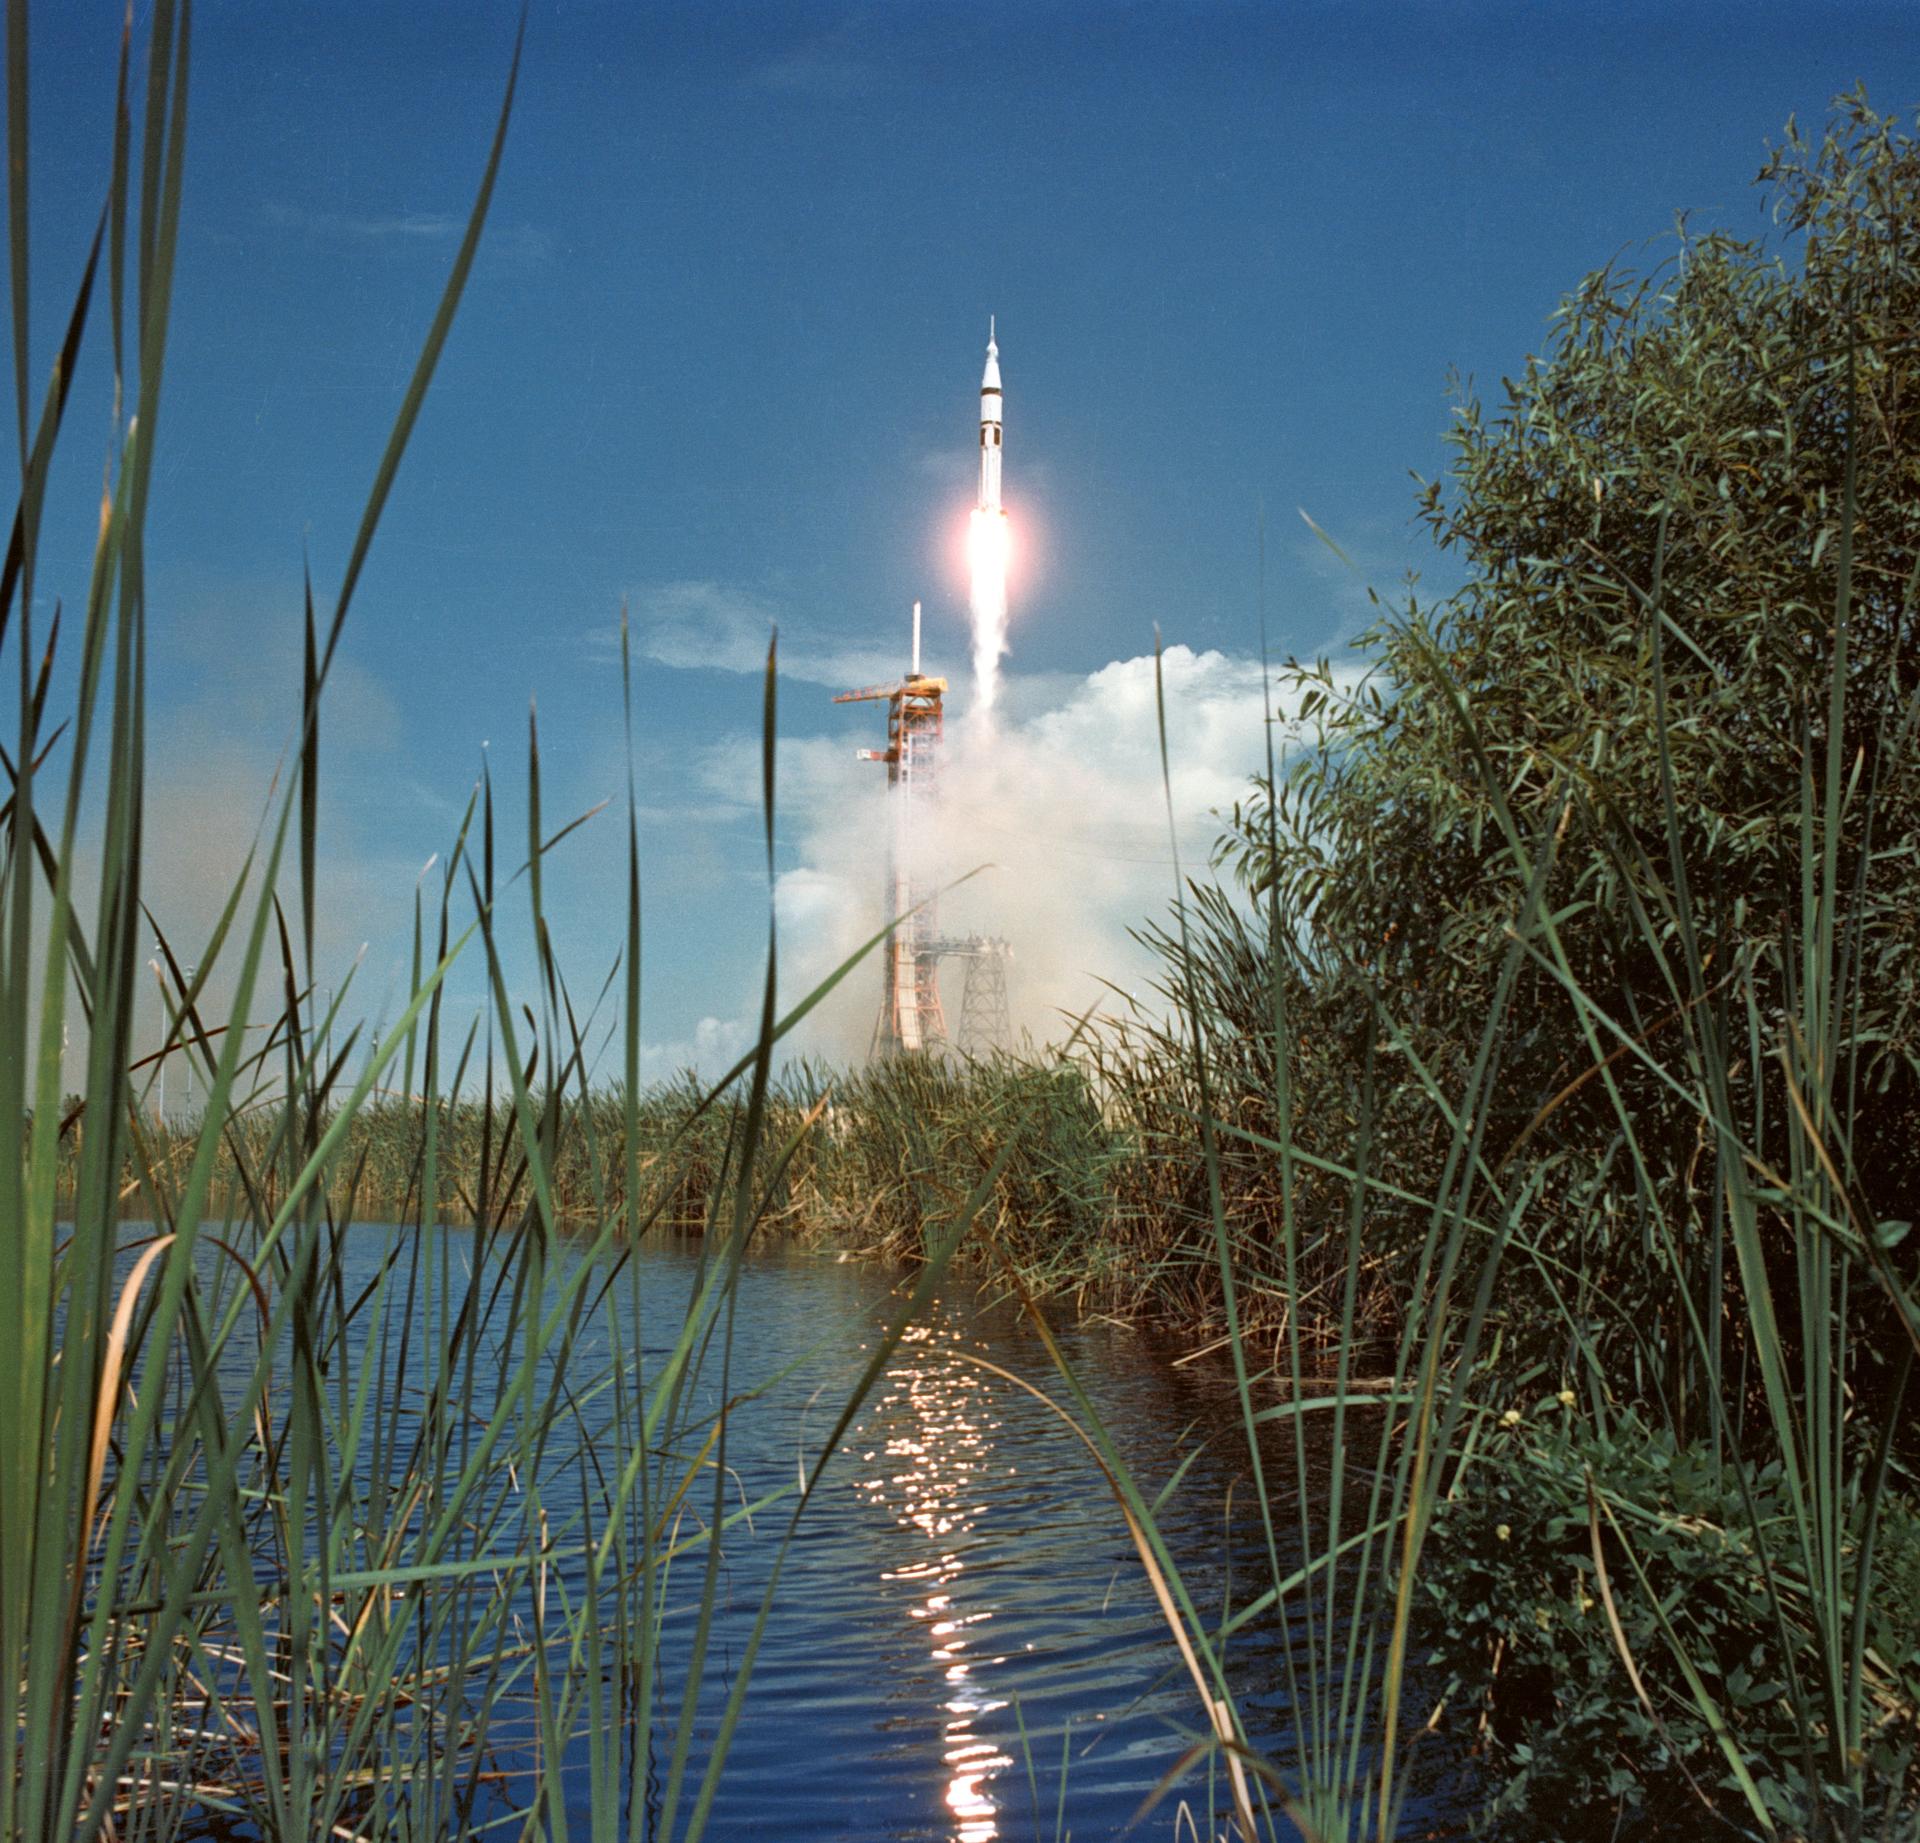 Launch of the Apollo/Saturn 1B space vehicle on July 15, 1975 from Launch Pad 39B at Kennedy Space Center.